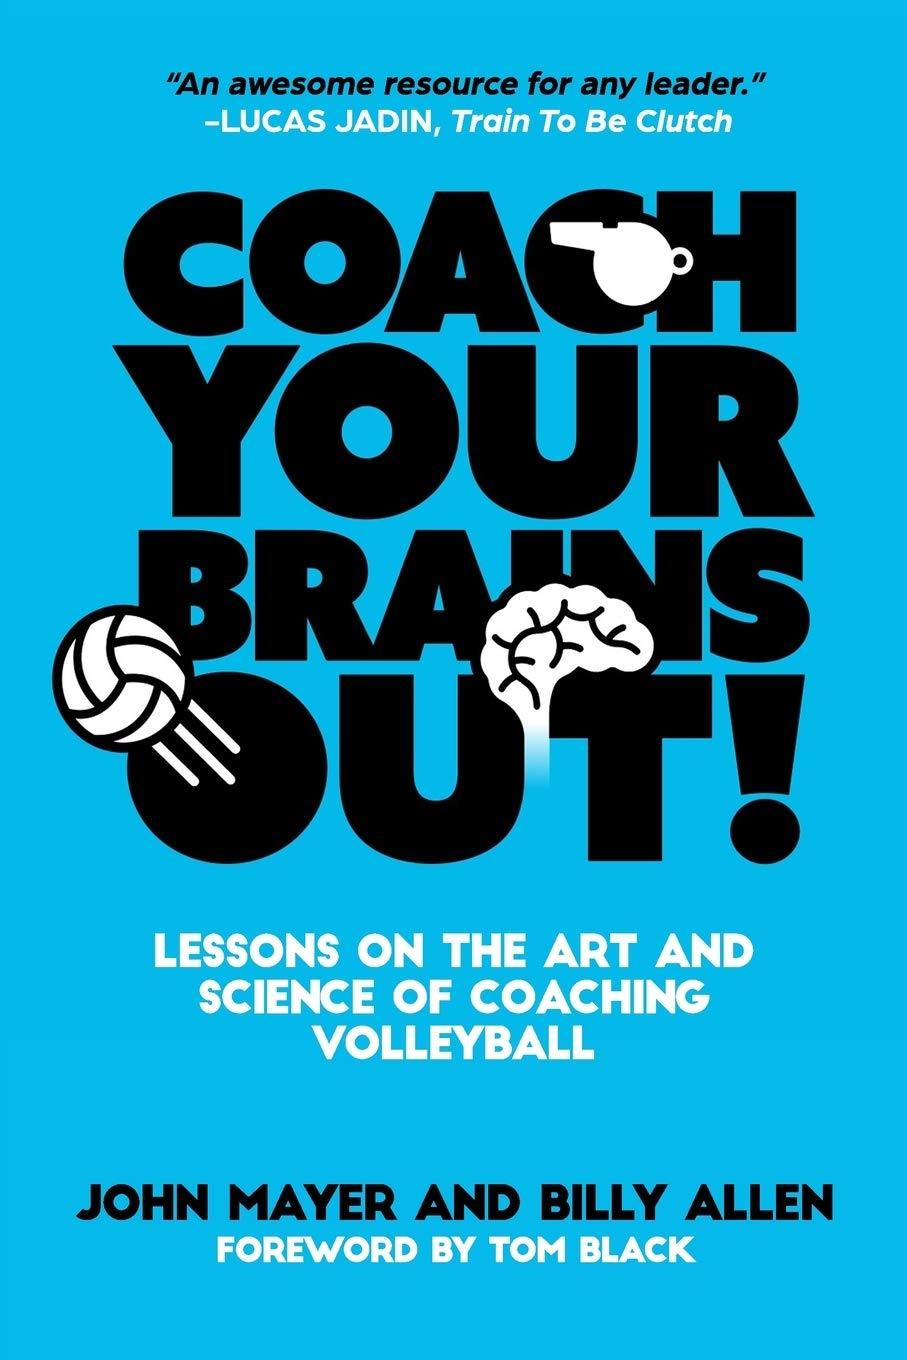 Coach Your Brains Out